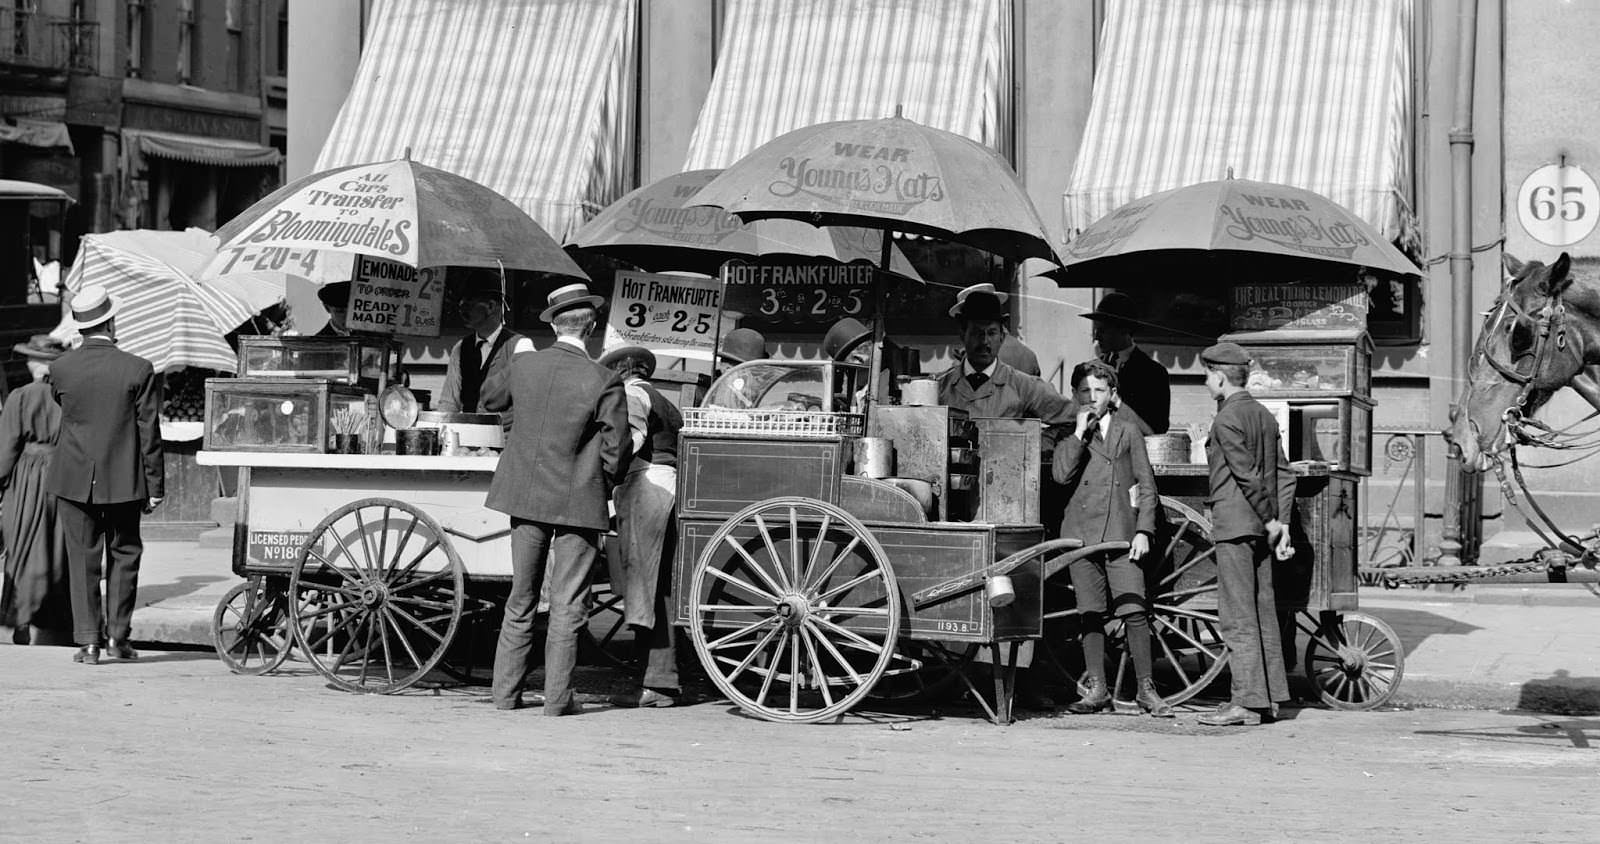 A frankfurter stand in London, England in 1892.